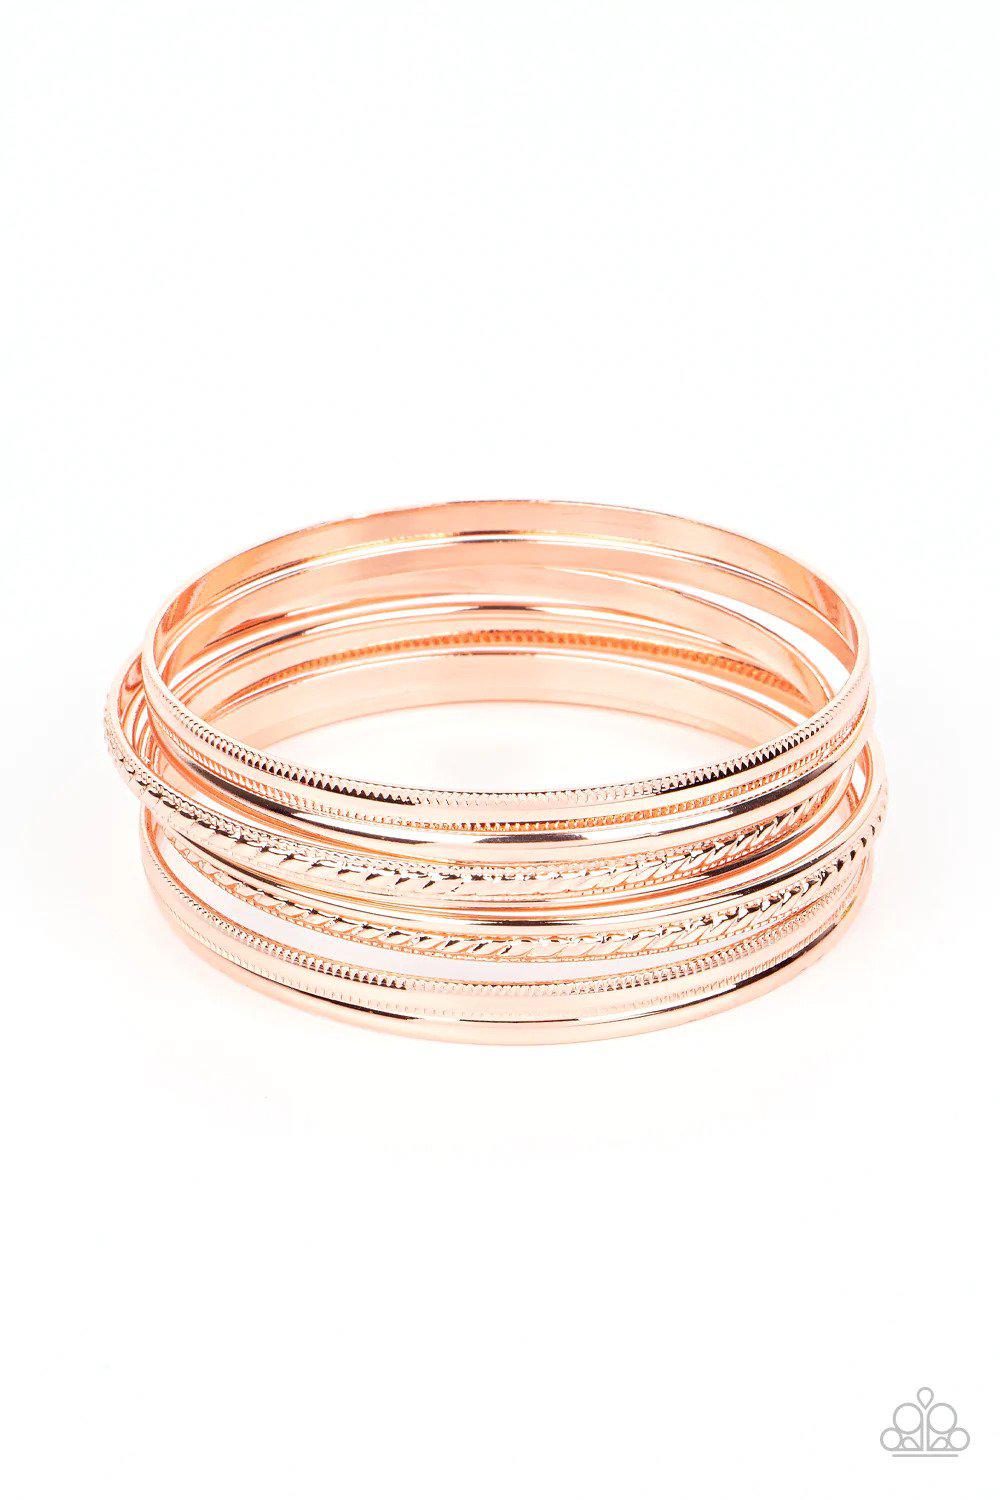 Stackable Shimmer Copper Bracelet - Paparazzi Accessories- lightbox - CarasShop.com - $5 Jewelry by Cara Jewels